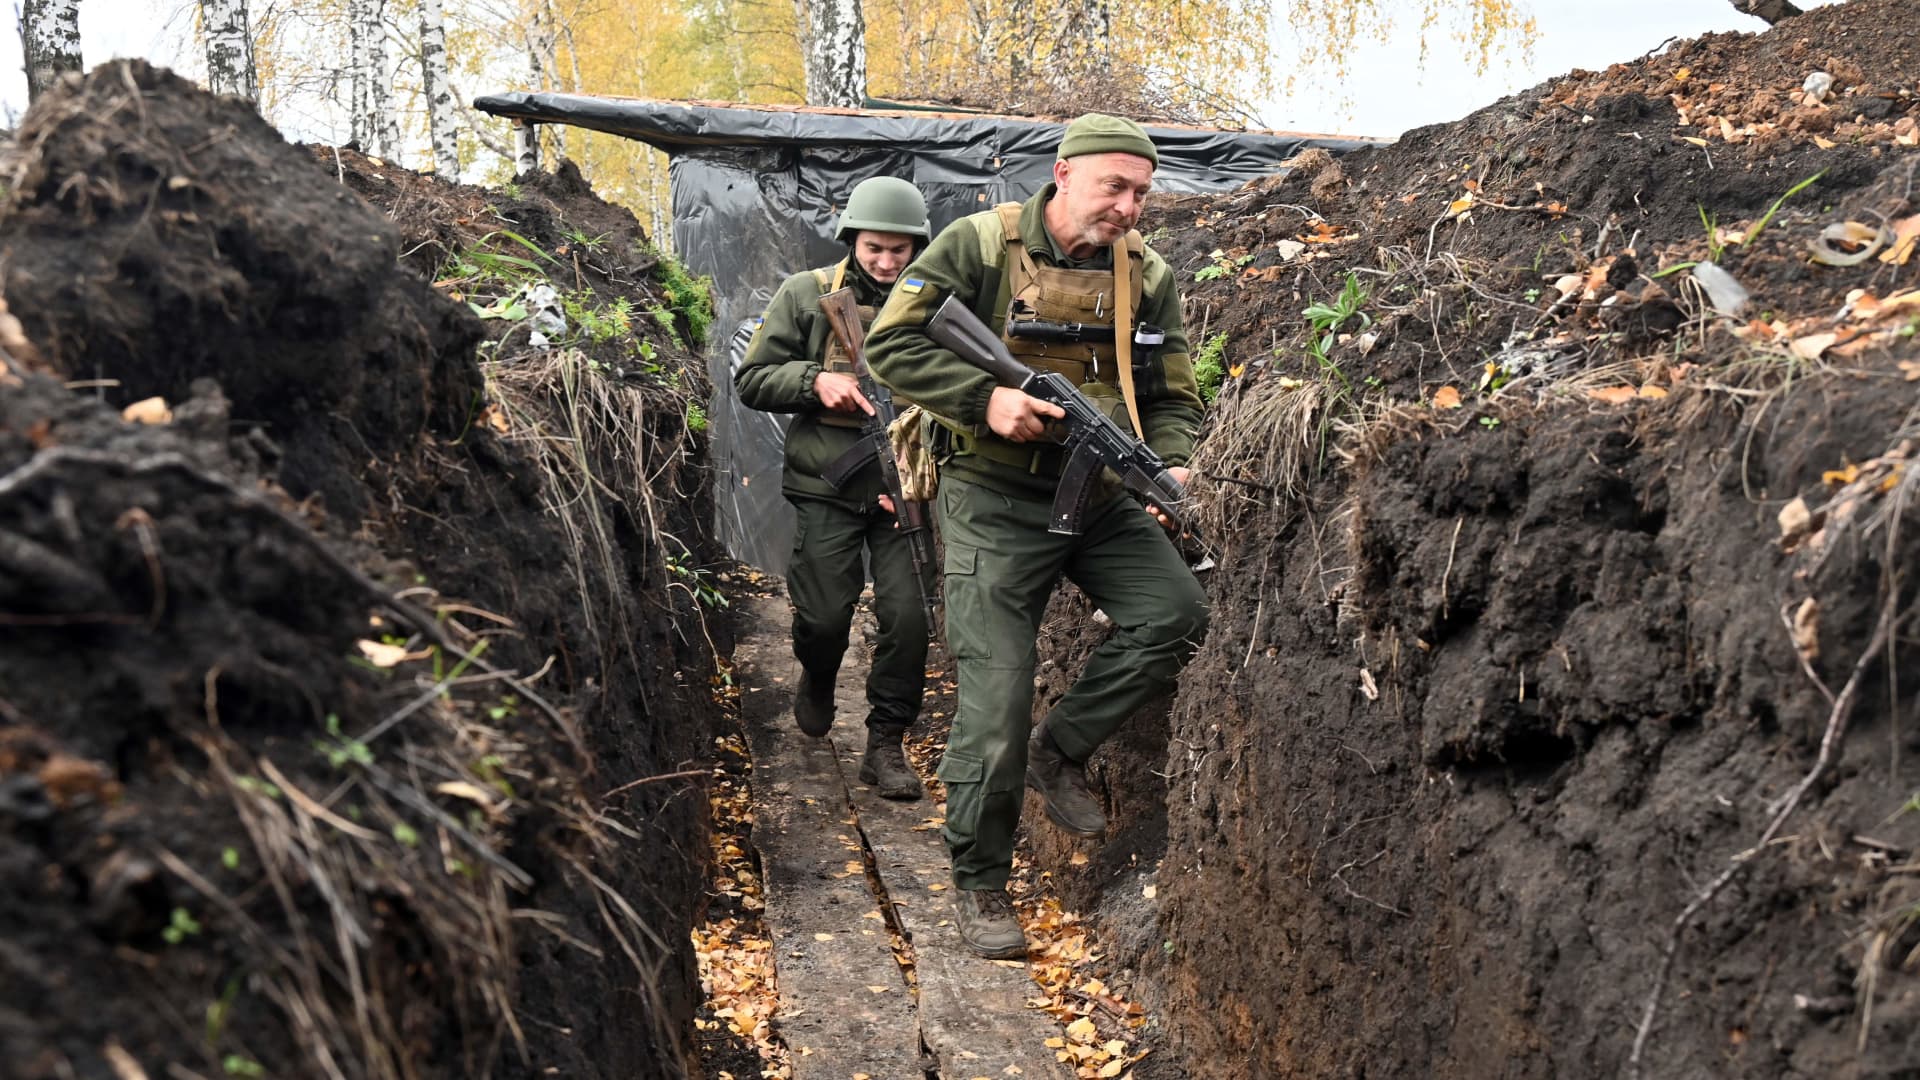 Soldiers of the National Guard of Ukraine walk along a trench towards their positions on the northern occupied territories of Kharkiv region on October 21, 2022, amid the Russian military invasion of Ukraine.